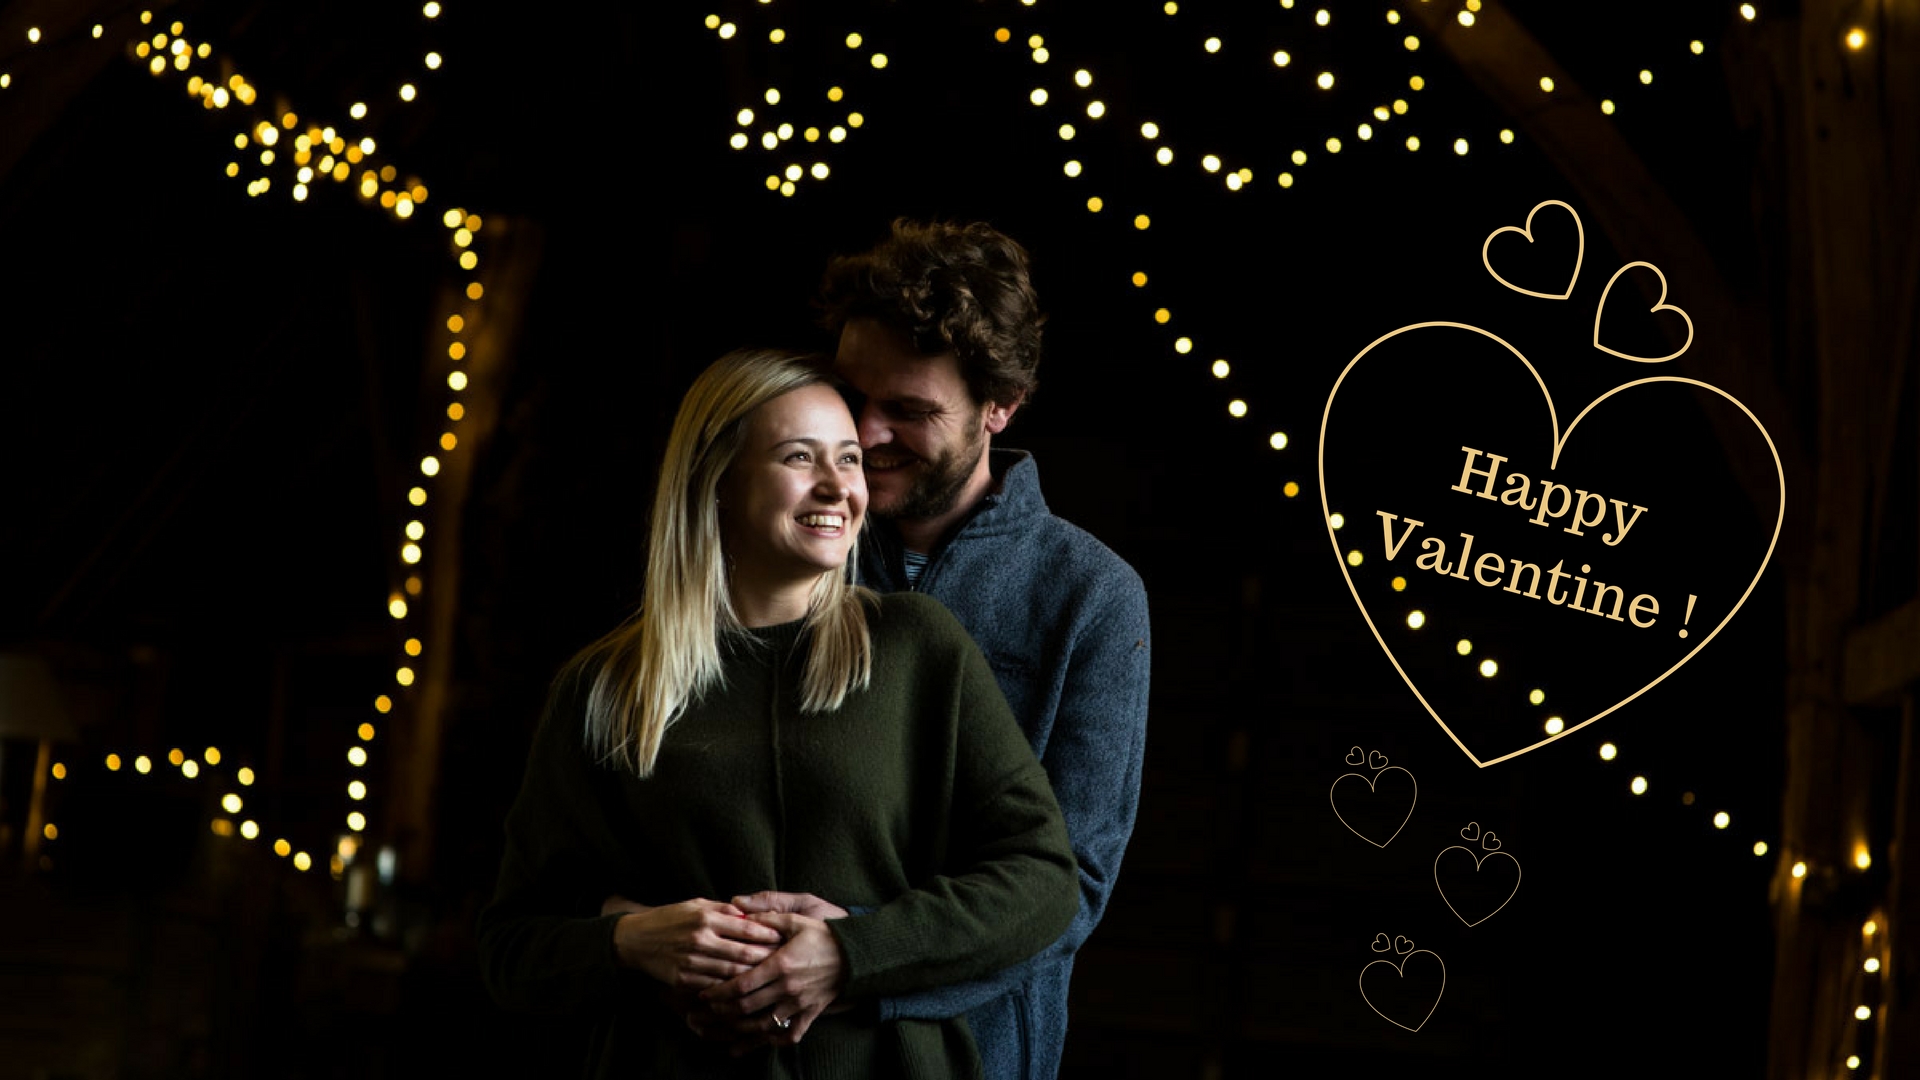 Valentine Photoshoot promotional image featuring Steven and Jane during their Kent engagement photoshoot